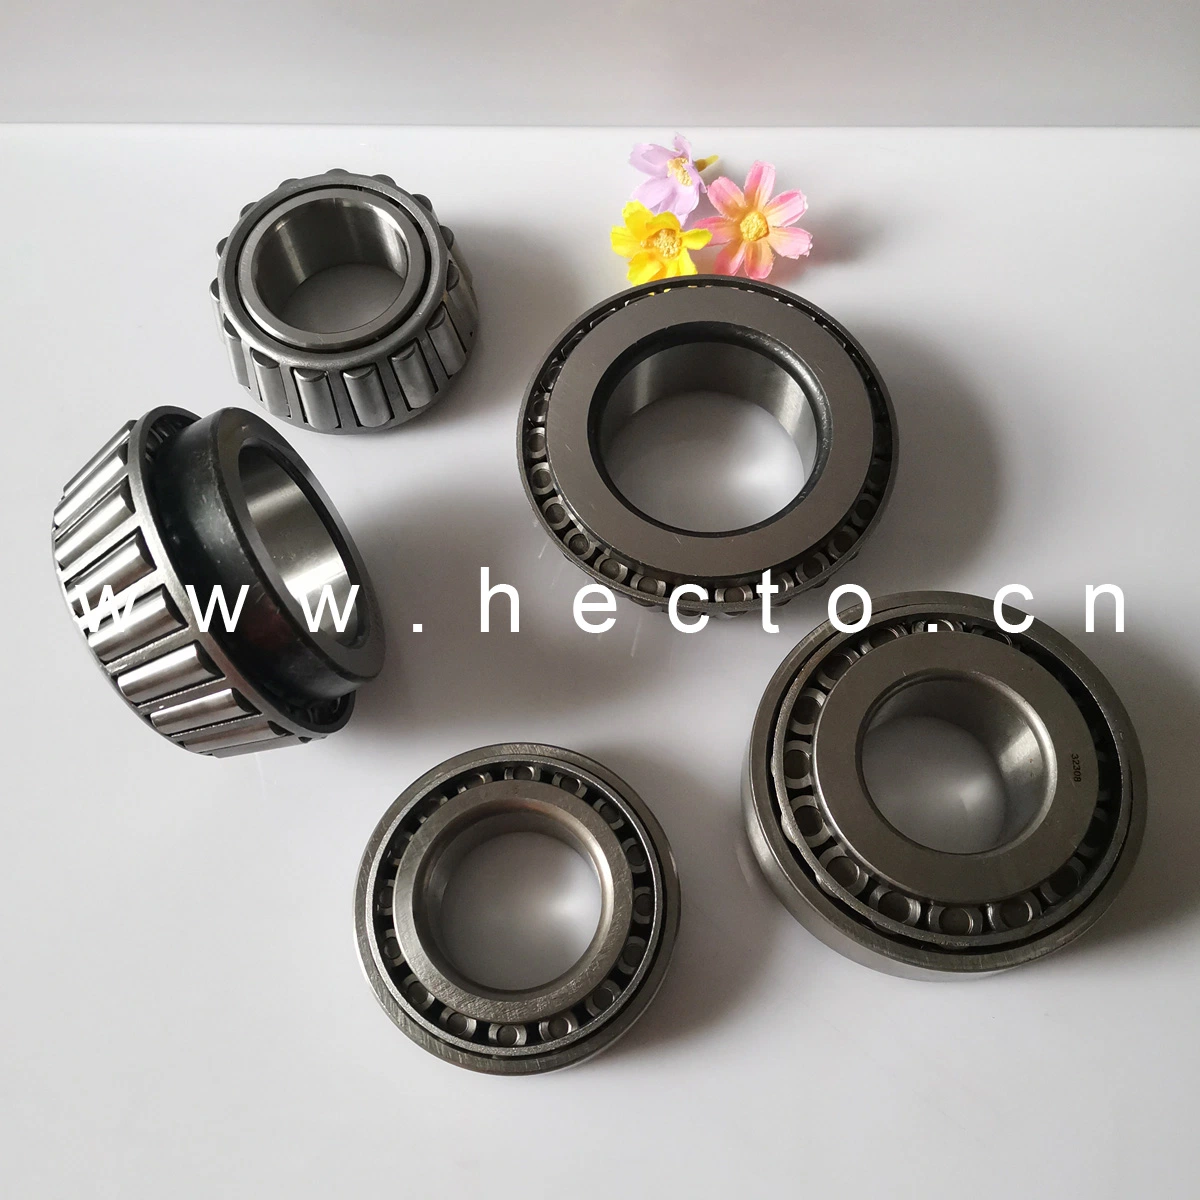 Inch Tapered Taper Roller Bearing 25577/25520 Pillow Block Housing Magnetic Wheel Hub Clutch Release Tapered Roller Bearing Deep Groove Ball Bearing